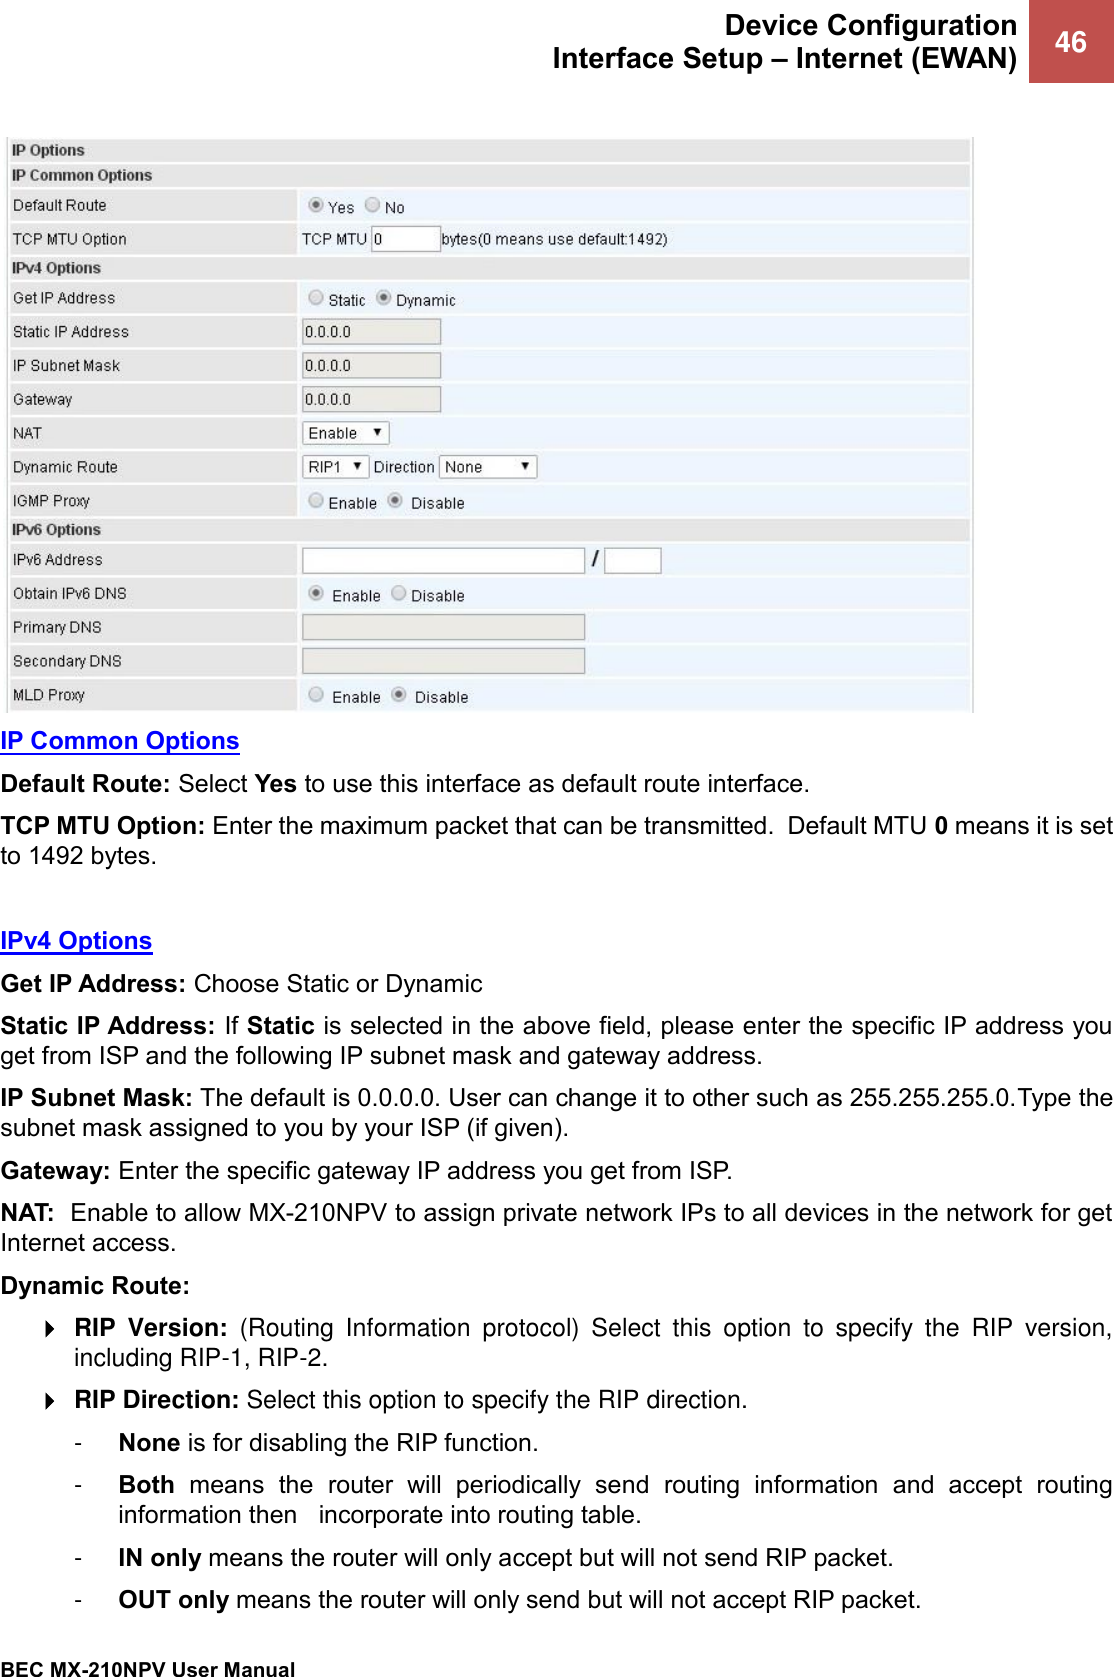 Device Configuration Interface Setup – Internet (EWAN) 46   BEC MX-210NPV User Manual   IP Common Options Default Route: Select Yes to use this interface as default route interface. TCP MTU Option: Enter the maximum packet that can be transmitted.  Default MTU 0 means it is set to 1492 bytes.    IPv4 Options Get IP Address: Choose Static or Dynamic Static IP Address: If Static is selected in the above field, please enter the specific IP address you get from ISP and the following IP subnet mask and gateway address. IP Subnet Mask: The default is 0.0.0.0. User can change it to other such as 255.255.255.0.Type the subnet mask assigned to you by your ISP (if given). Gateway: Enter the specific gateway IP address you get from ISP. NAT:  Enable to allow MX-210NPV to assign private network IPs to all devices in the network for get Internet access. Dynamic Route:   RIP  Version:  (Routing  Information  protocol)  Select  this  option  to  specify  the  RIP  version, including RIP-1, RIP-2.   RIP Direction: Select this option to specify the RIP direction.  -  None is for disabling the RIP function.  -  Both  means  the  router  will  periodically  send  routing  information  and  accept  routing information then   incorporate into routing table.  -  IN only means the router will only accept but will not send RIP packet.  -  OUT only means the router will only send but will not accept RIP packet. 